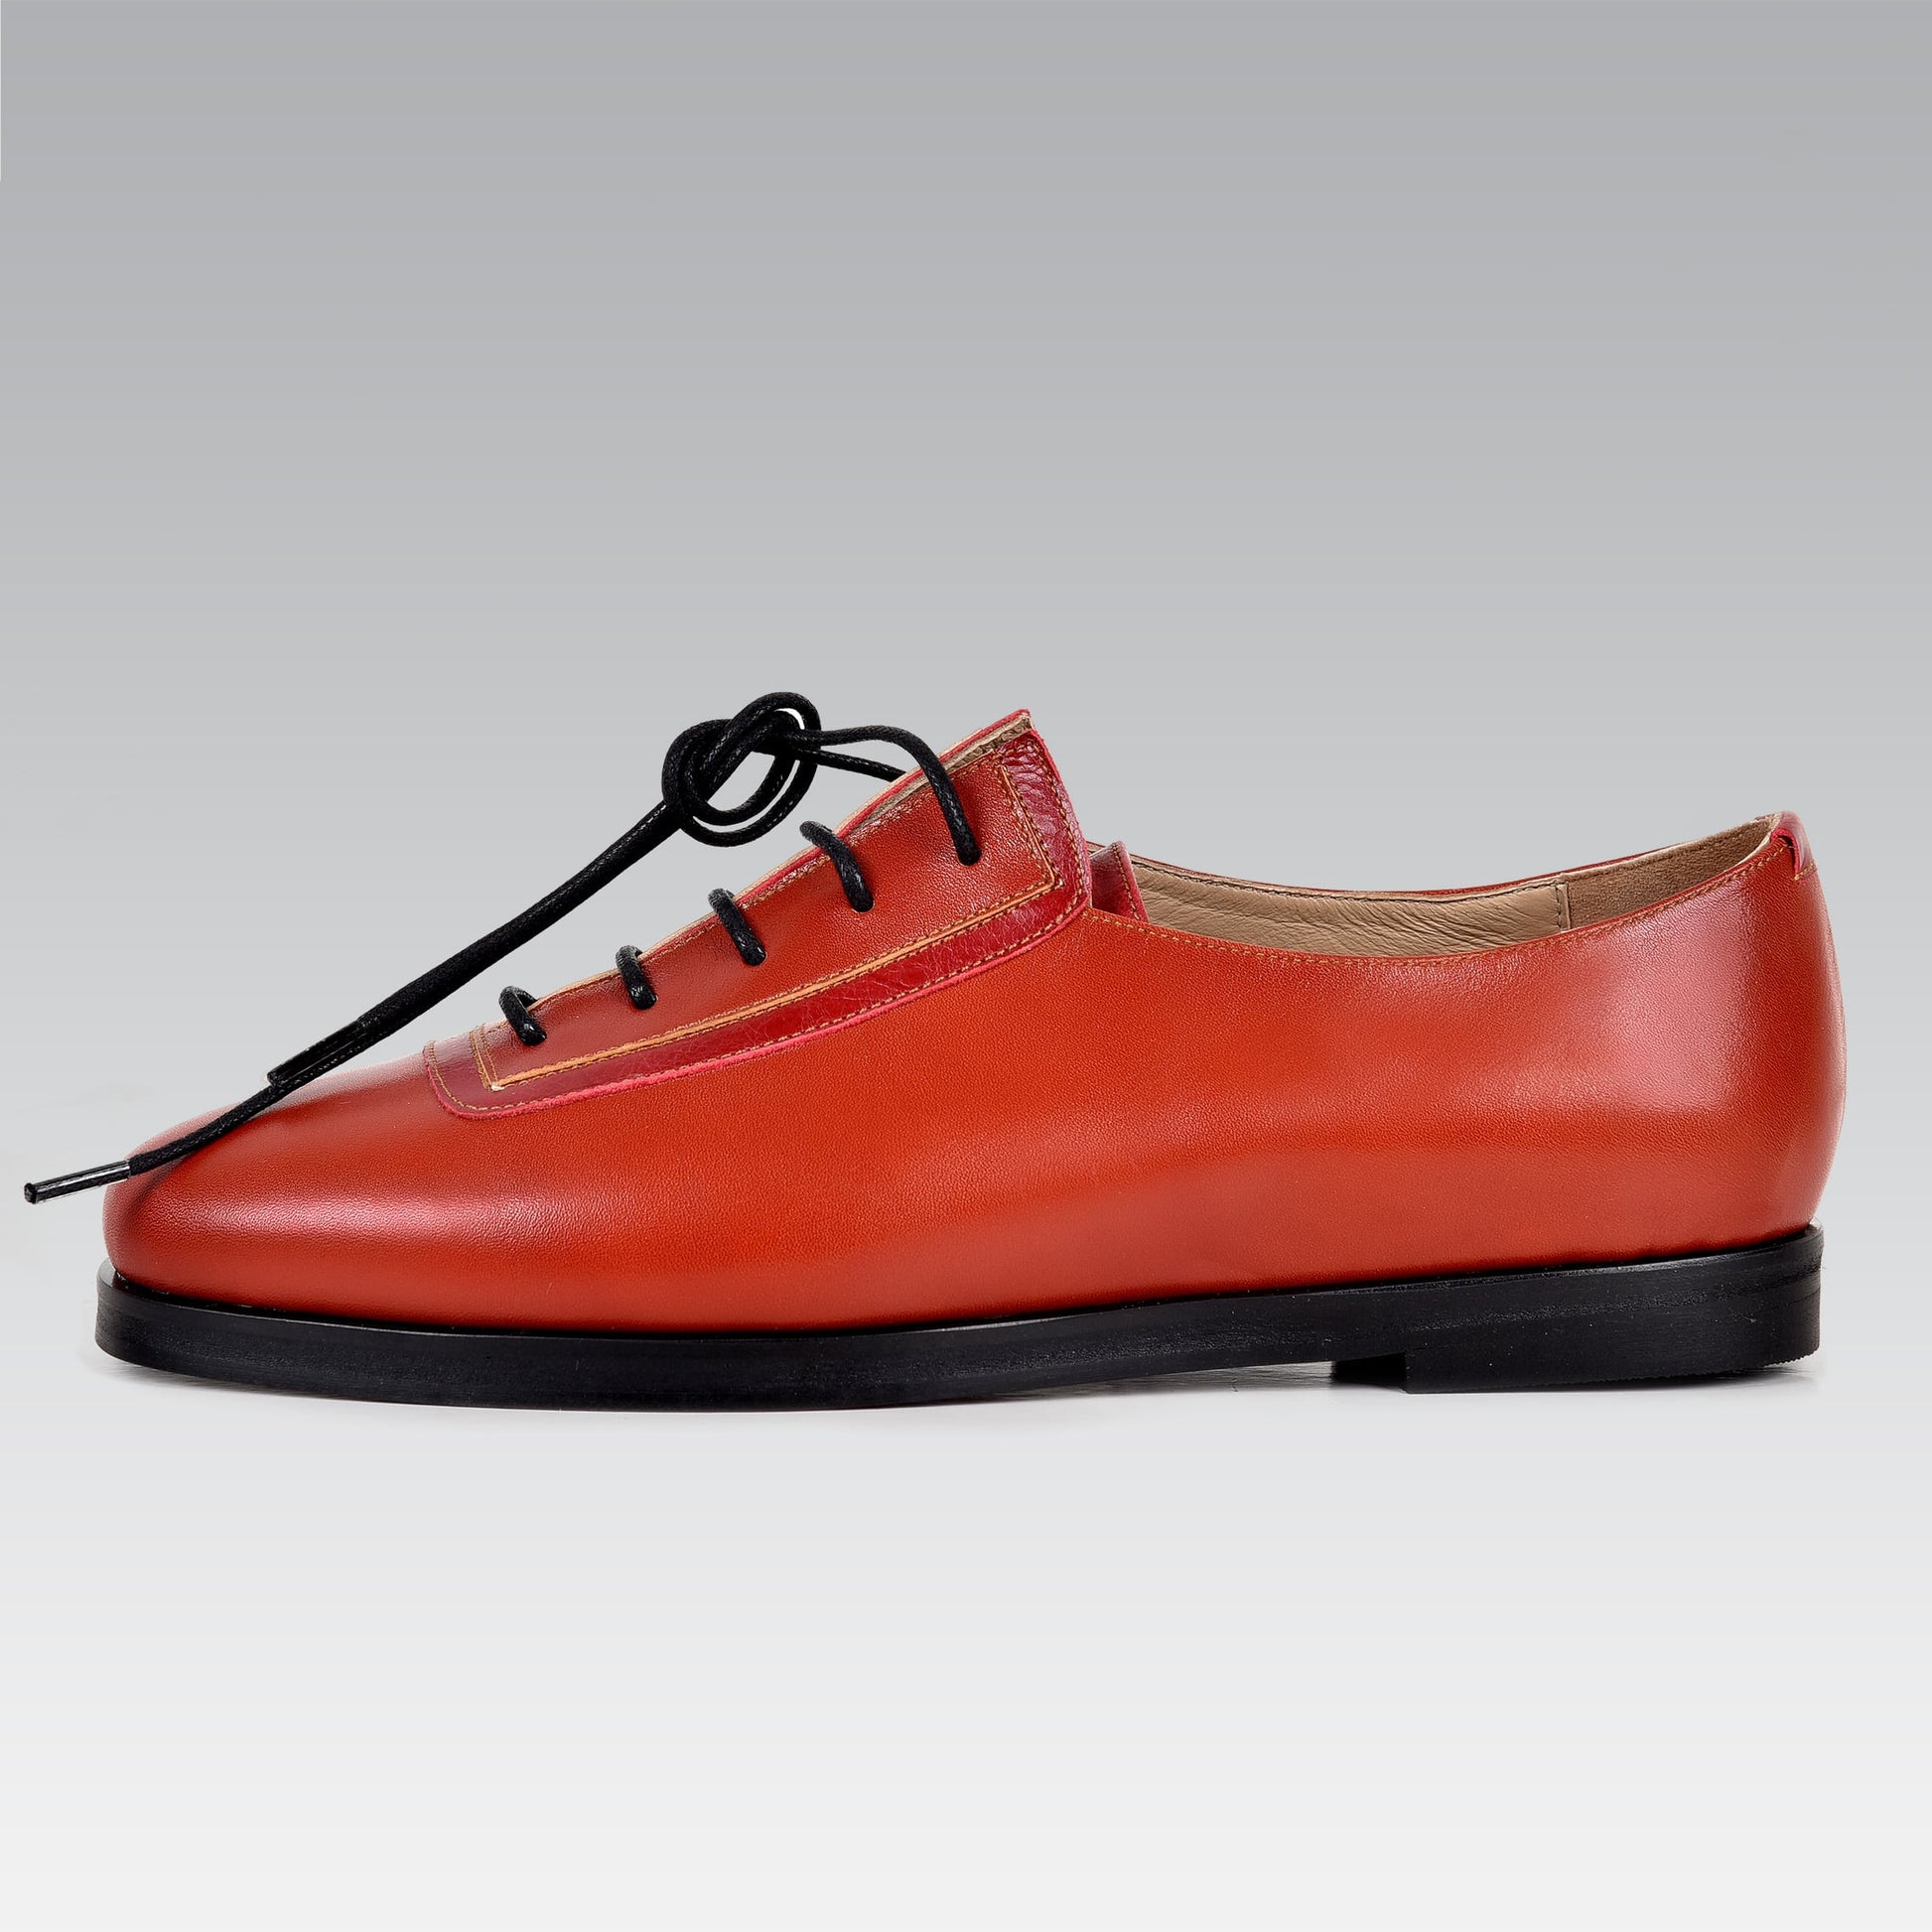 Red genuine leather handmade shoes